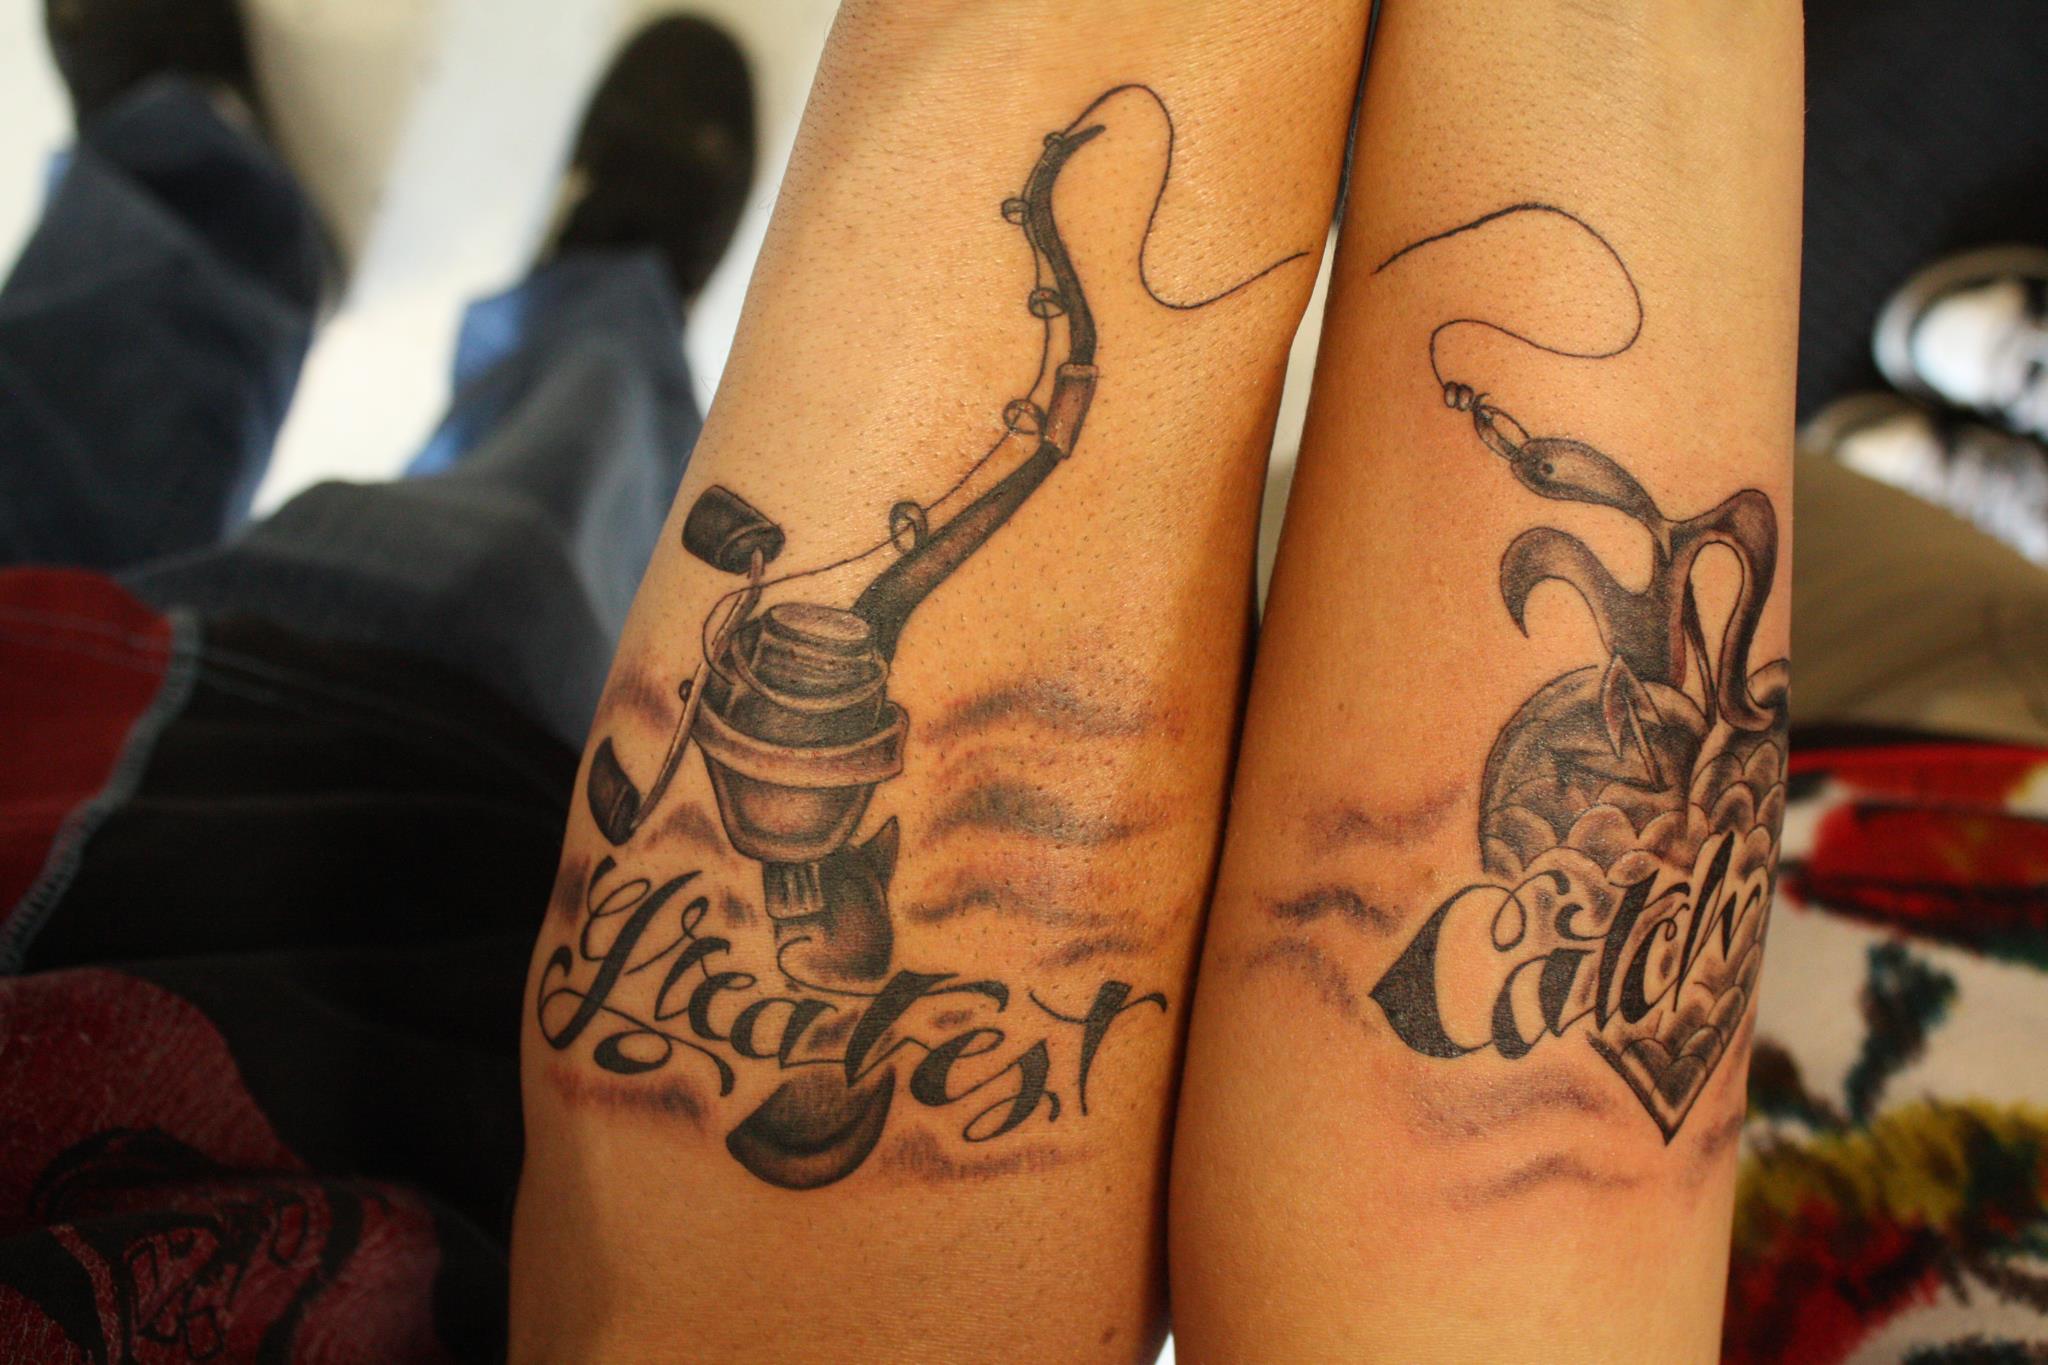  Couple  Tattoos  Designs Ideas and Meaning Tattoos  For You